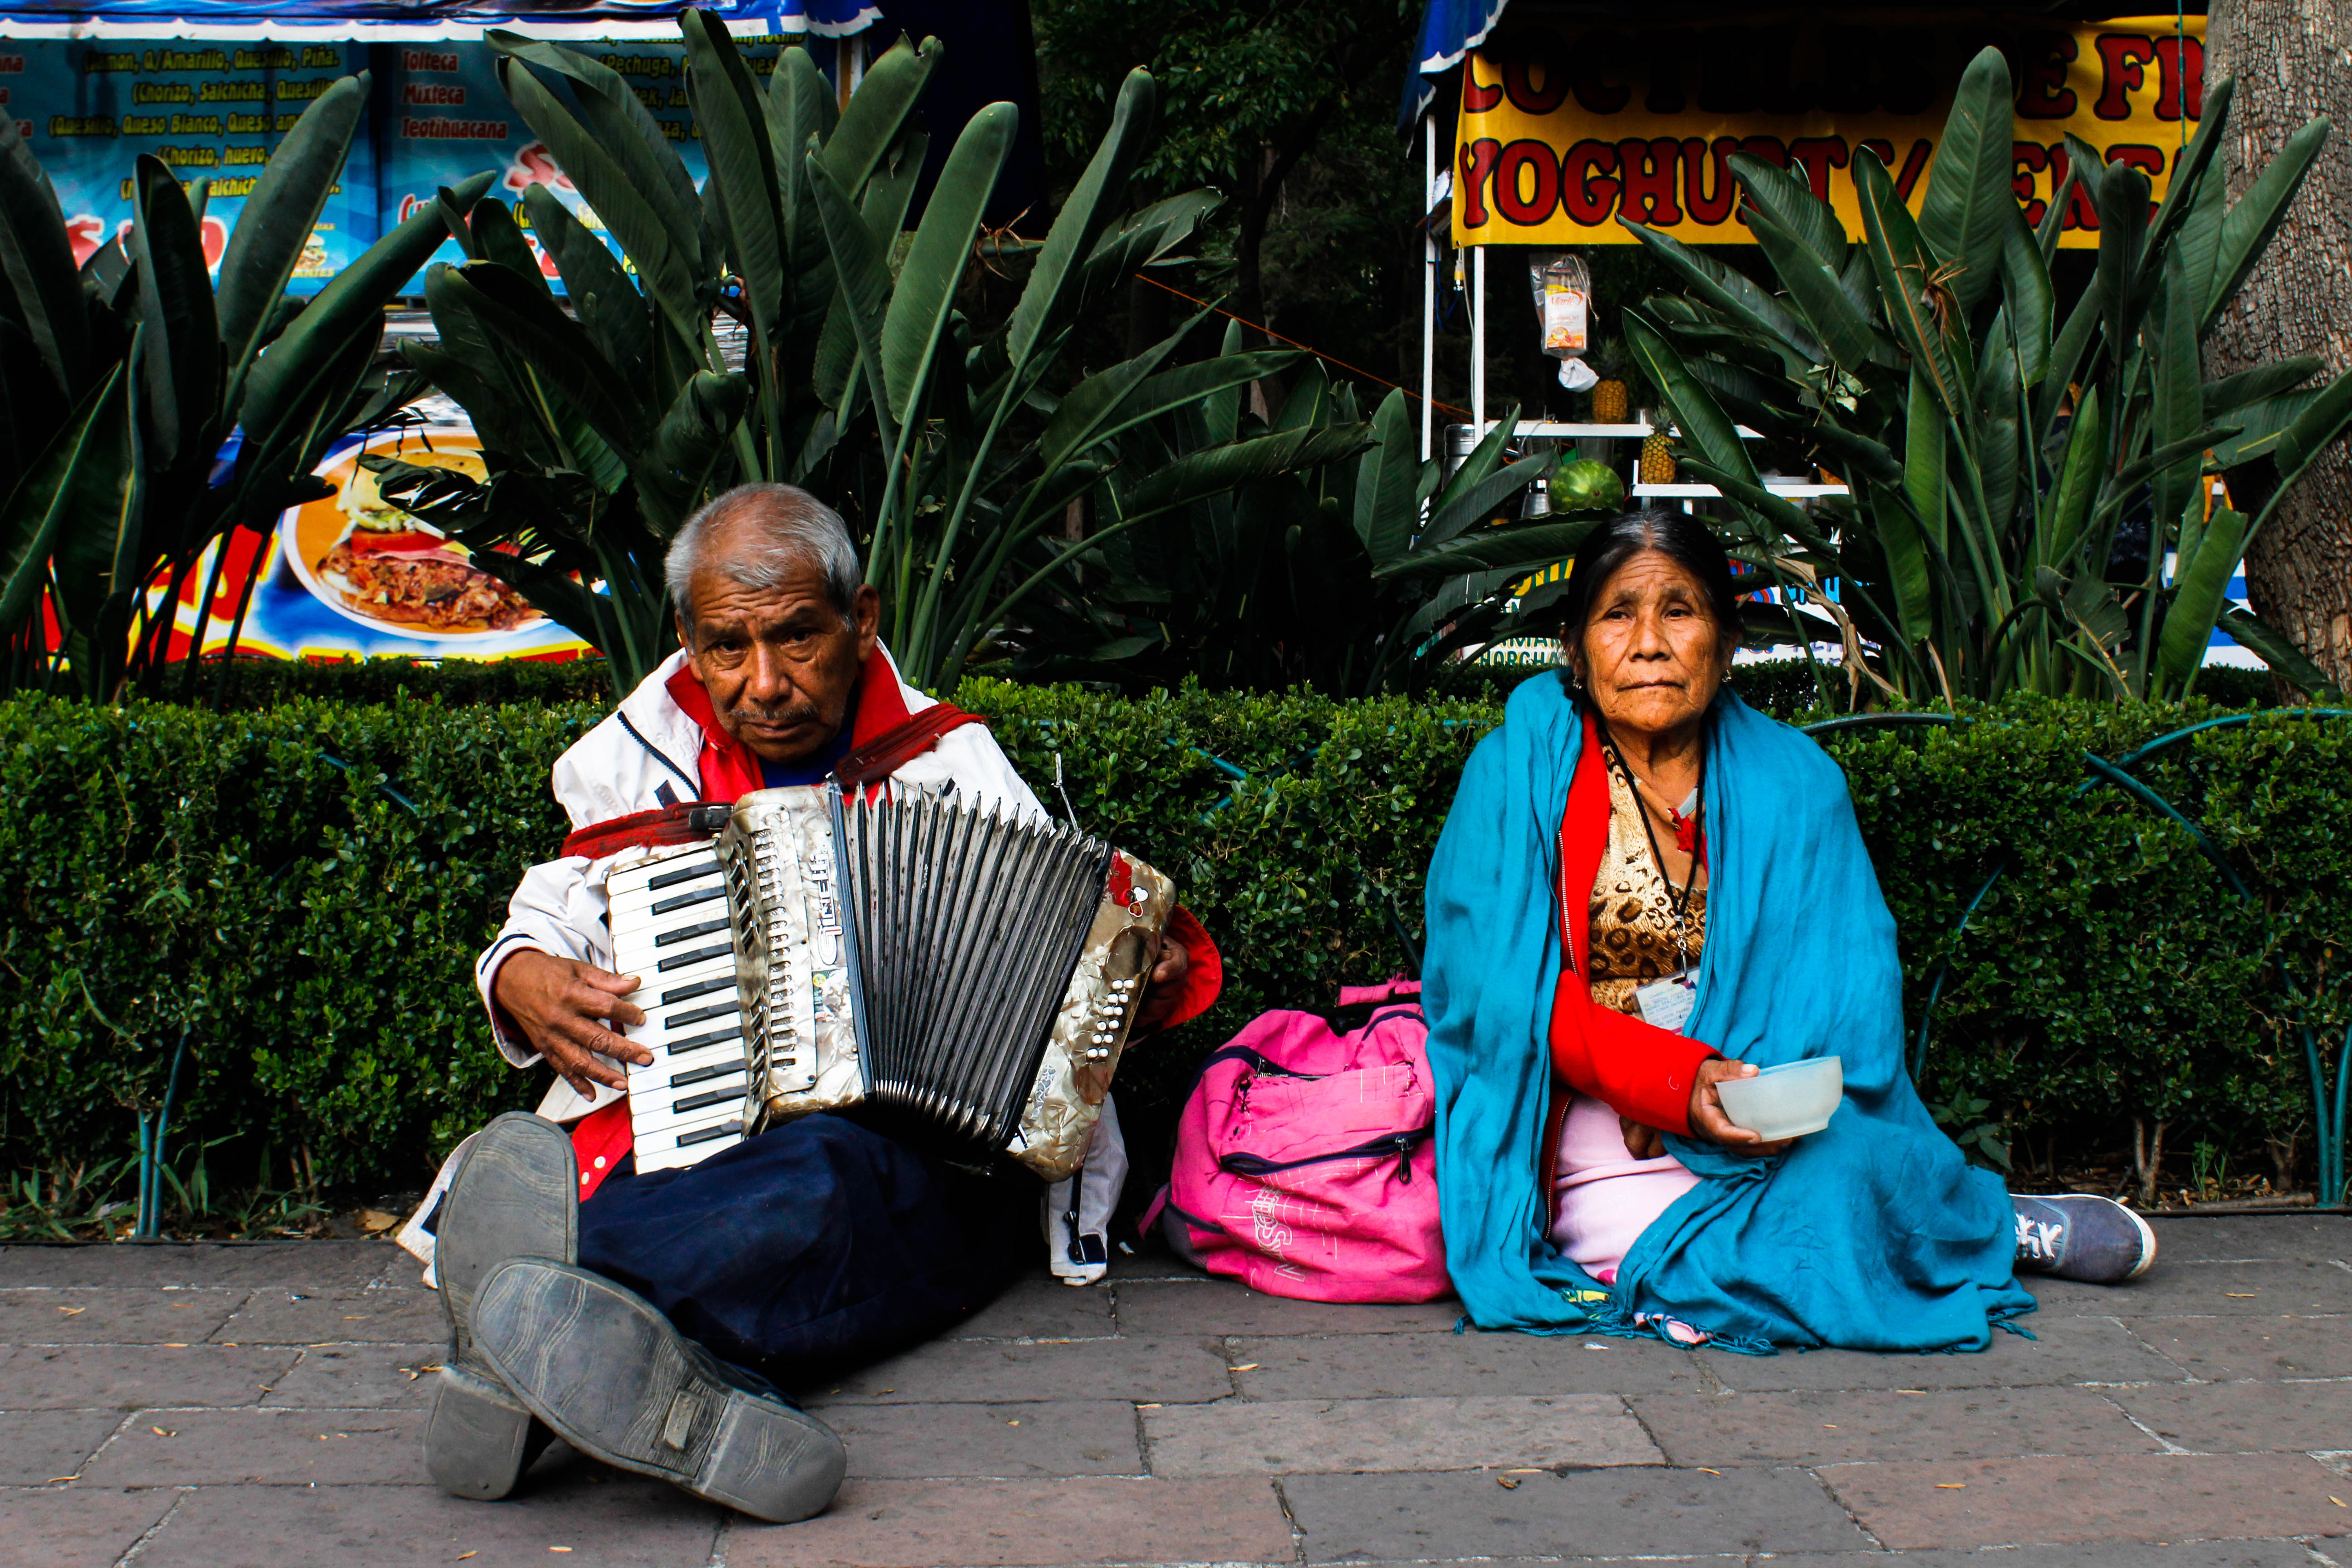 Outside the National Museum of Anthropology in Mexico City a man plays the accordion, while a woman asks for money.